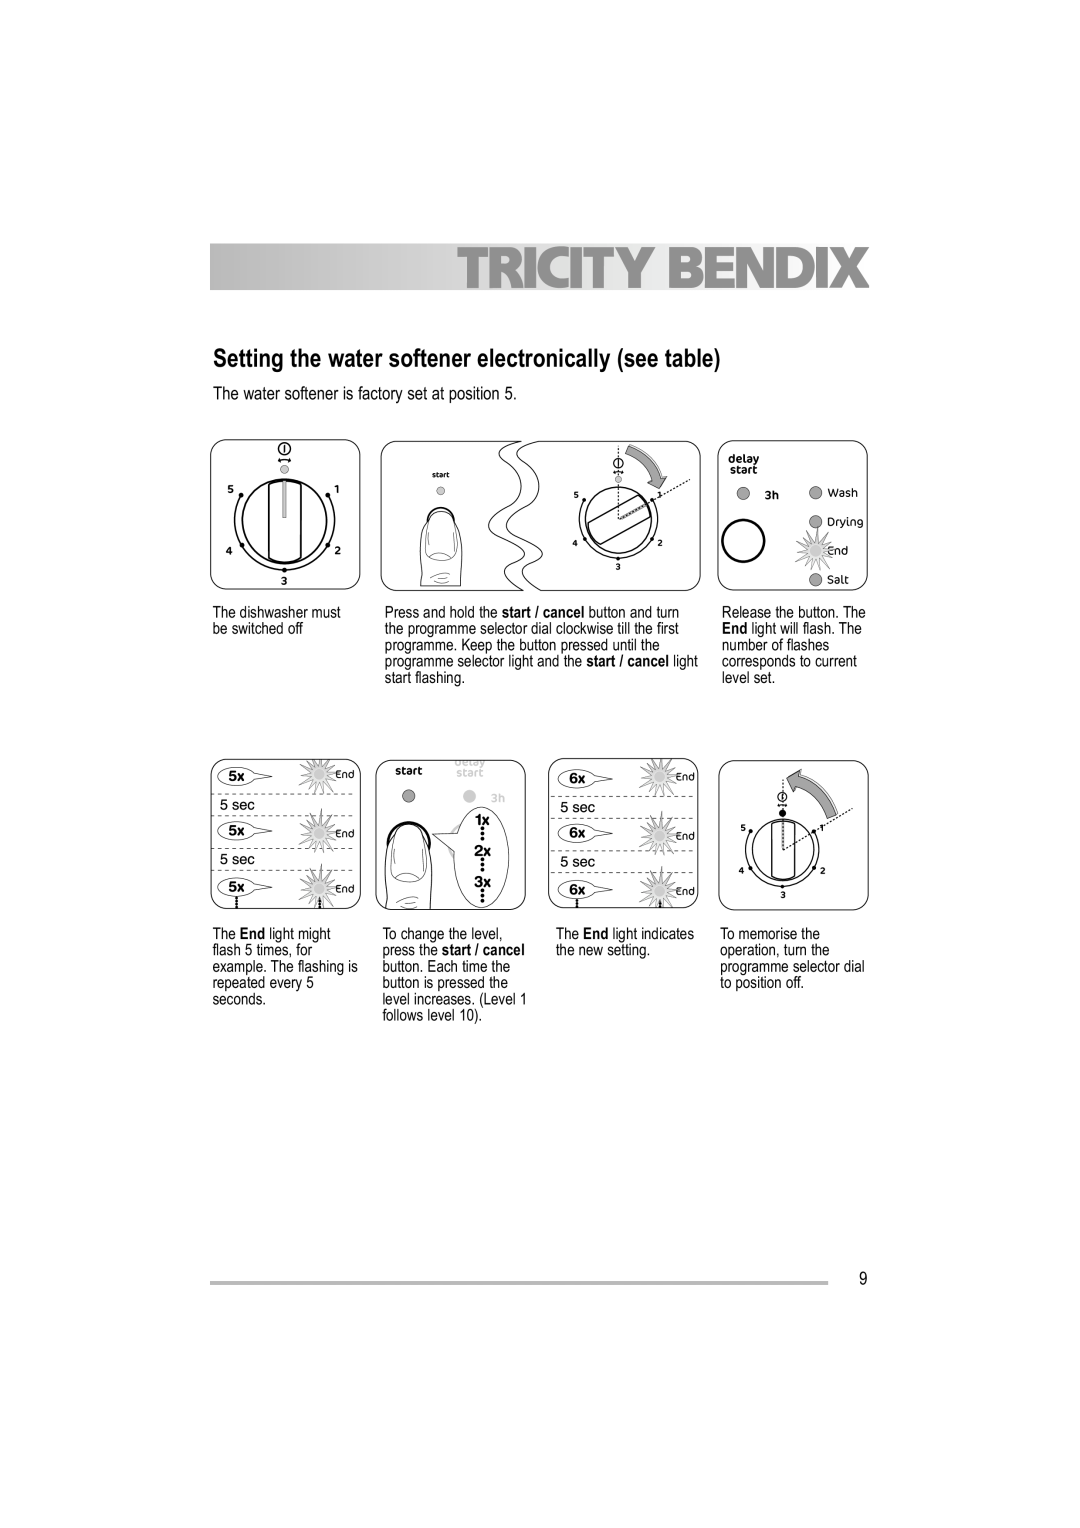 Tricity Bendix TDF 221 manual The water softener is factory set at position 